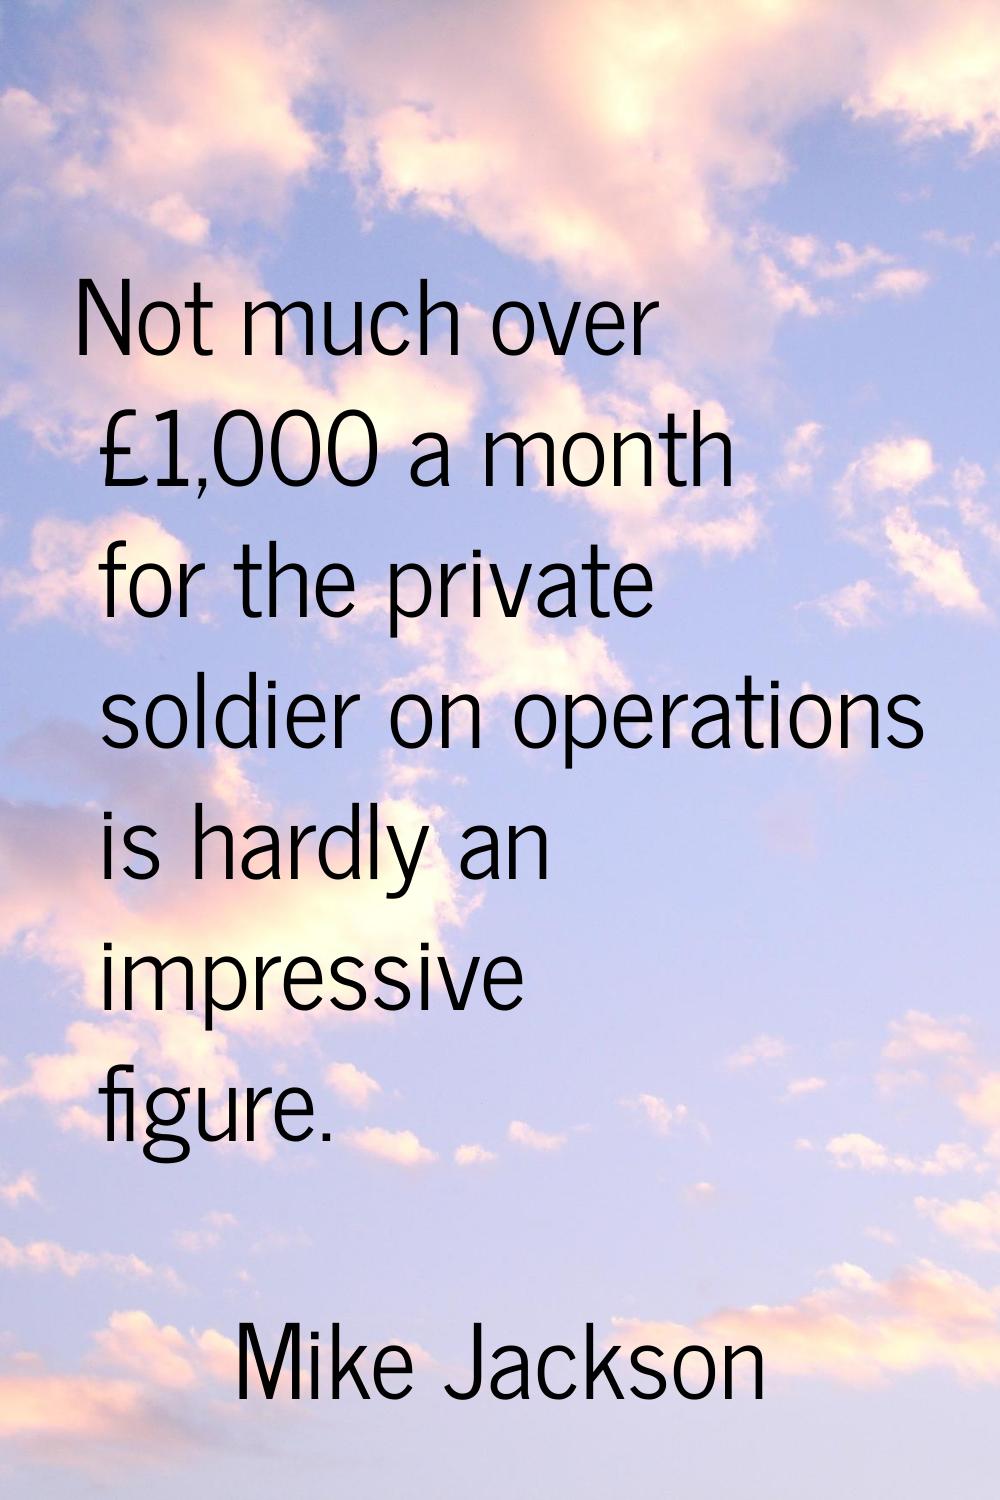 Not much over £1,000 a month for the private soldier on operations is hardly an impressive figure.